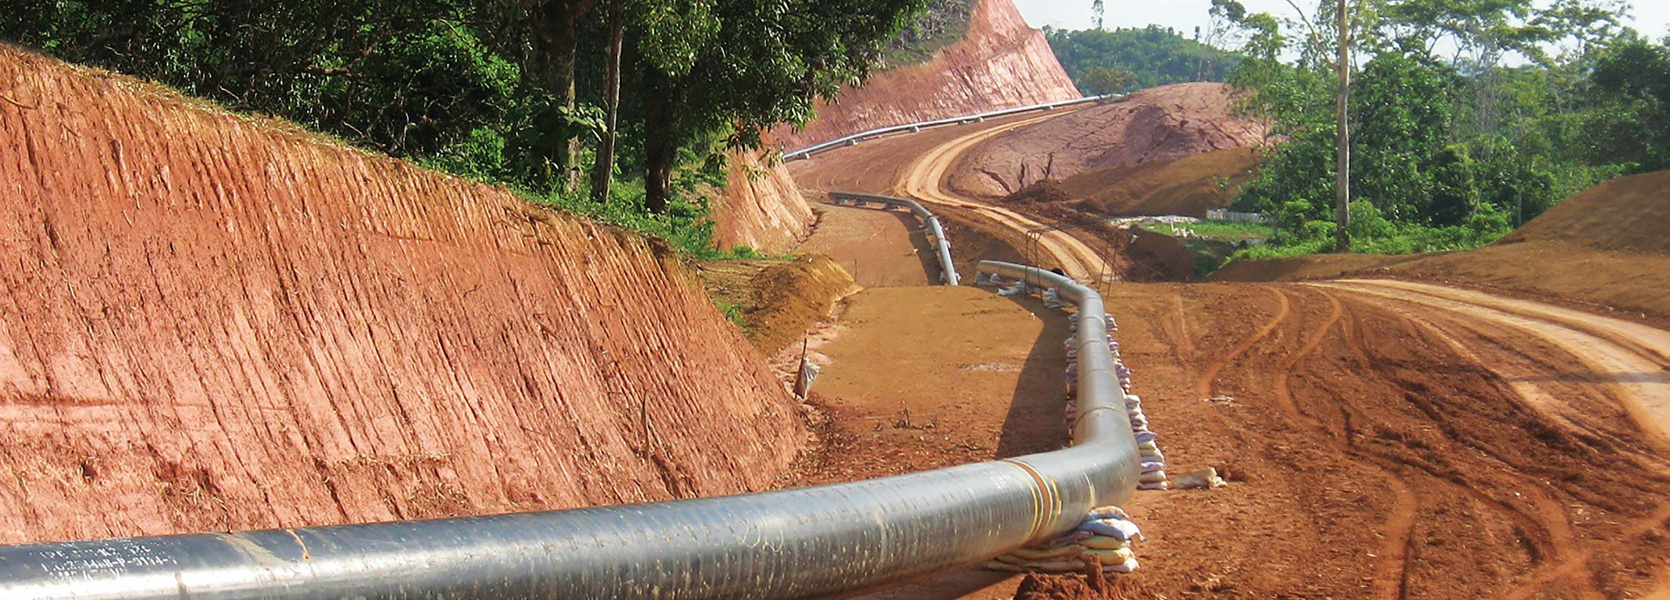 Image: Ambatovy Nickel: World's first commercial nickel laterite slurry pipeline